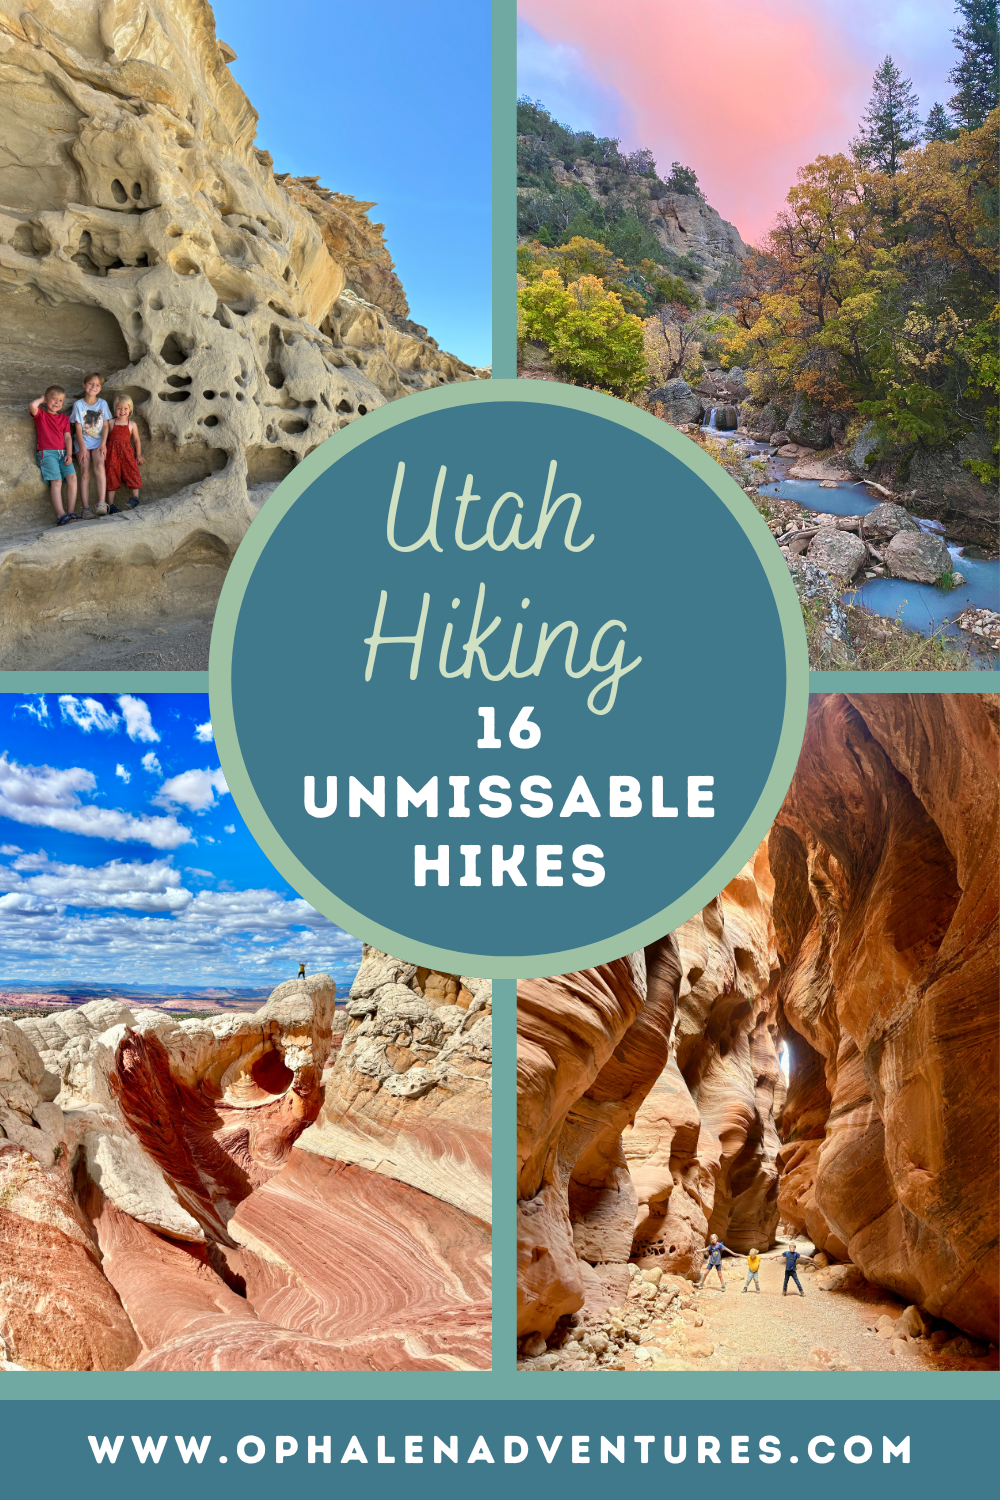 Utah Hiking: 16 Unmissable Hikes The Whole Family Will Love